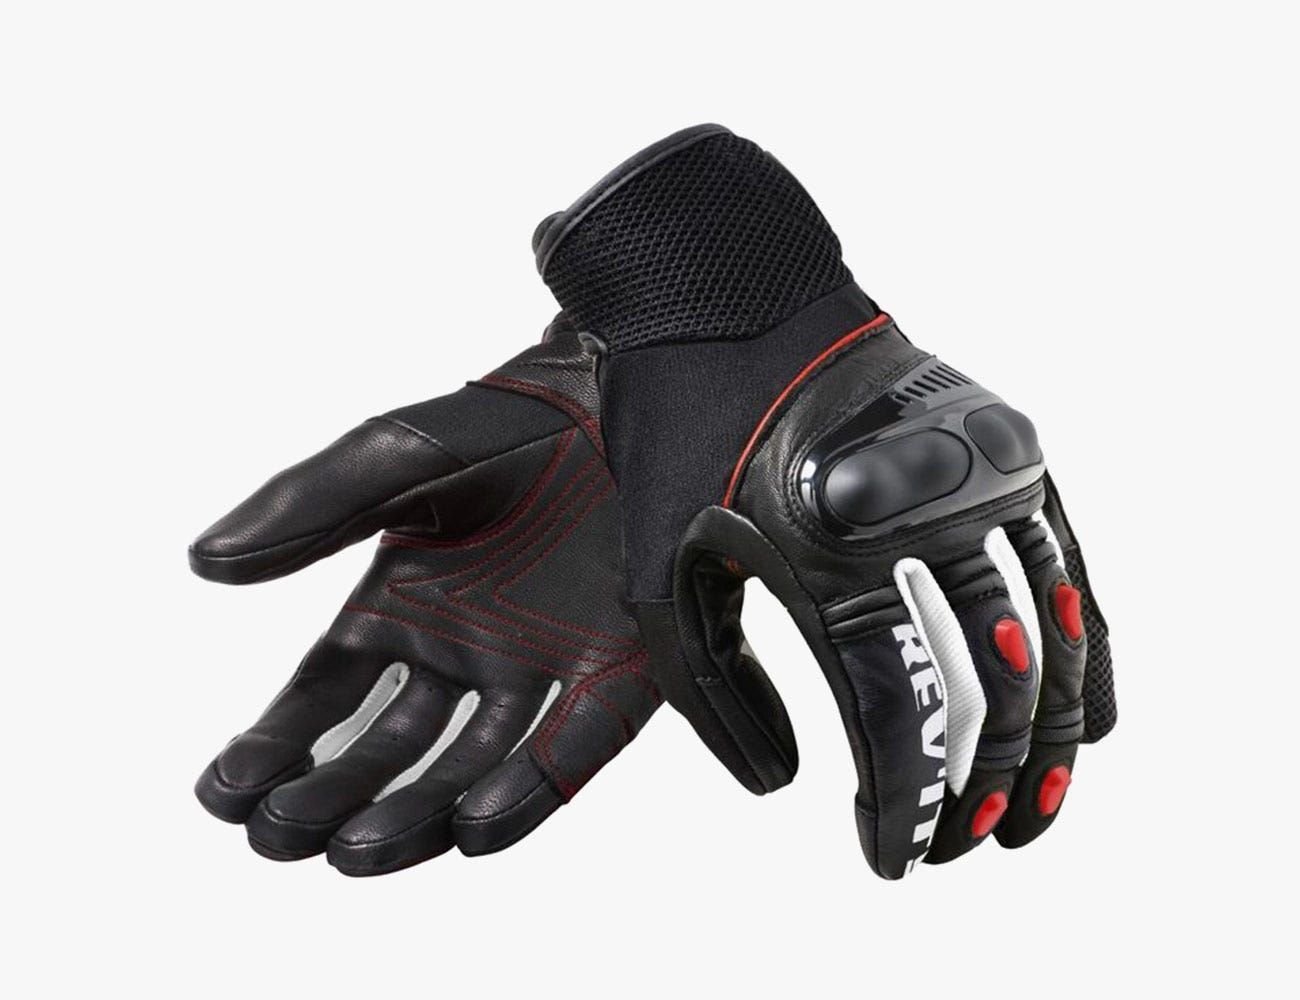 LEATHER GLOVES SOFT COMFORTABLE RIDING MOTORBIKE CAR BUS OUTDOOR WALKING 